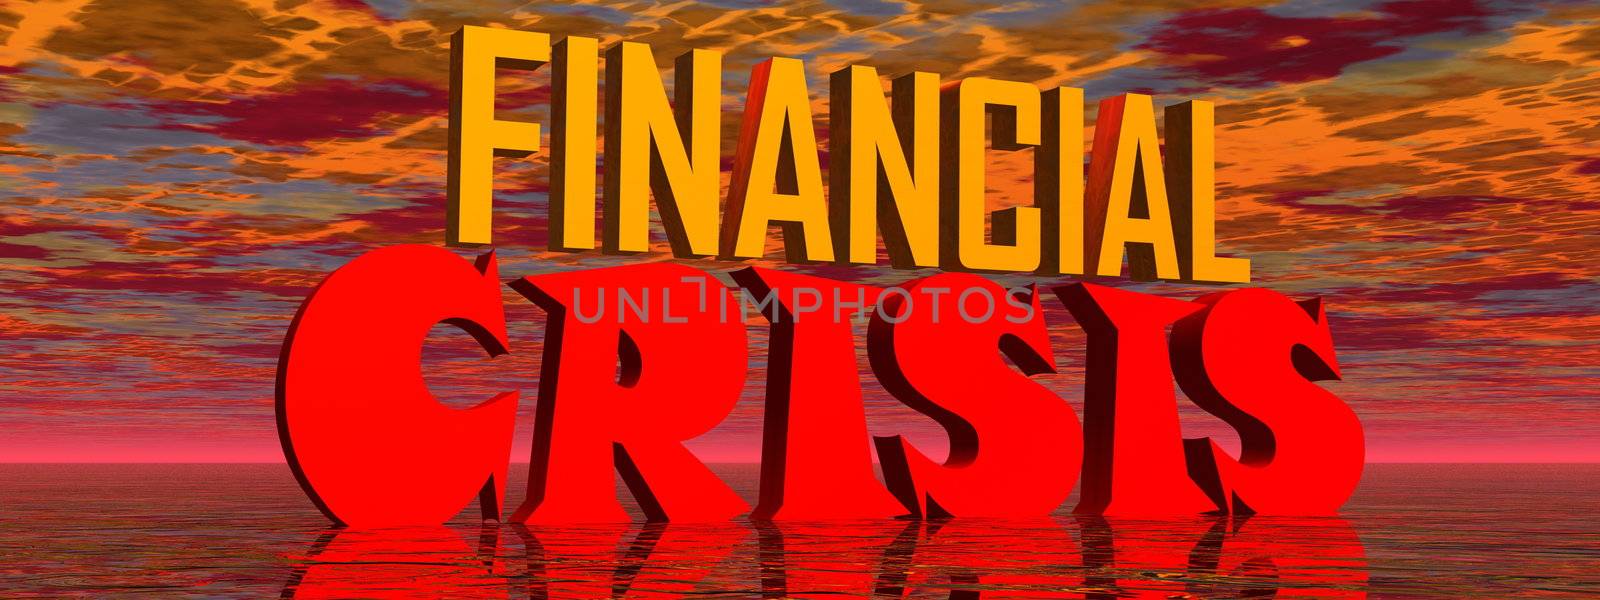 Red and orange capital letters for financial crisis in stormy background